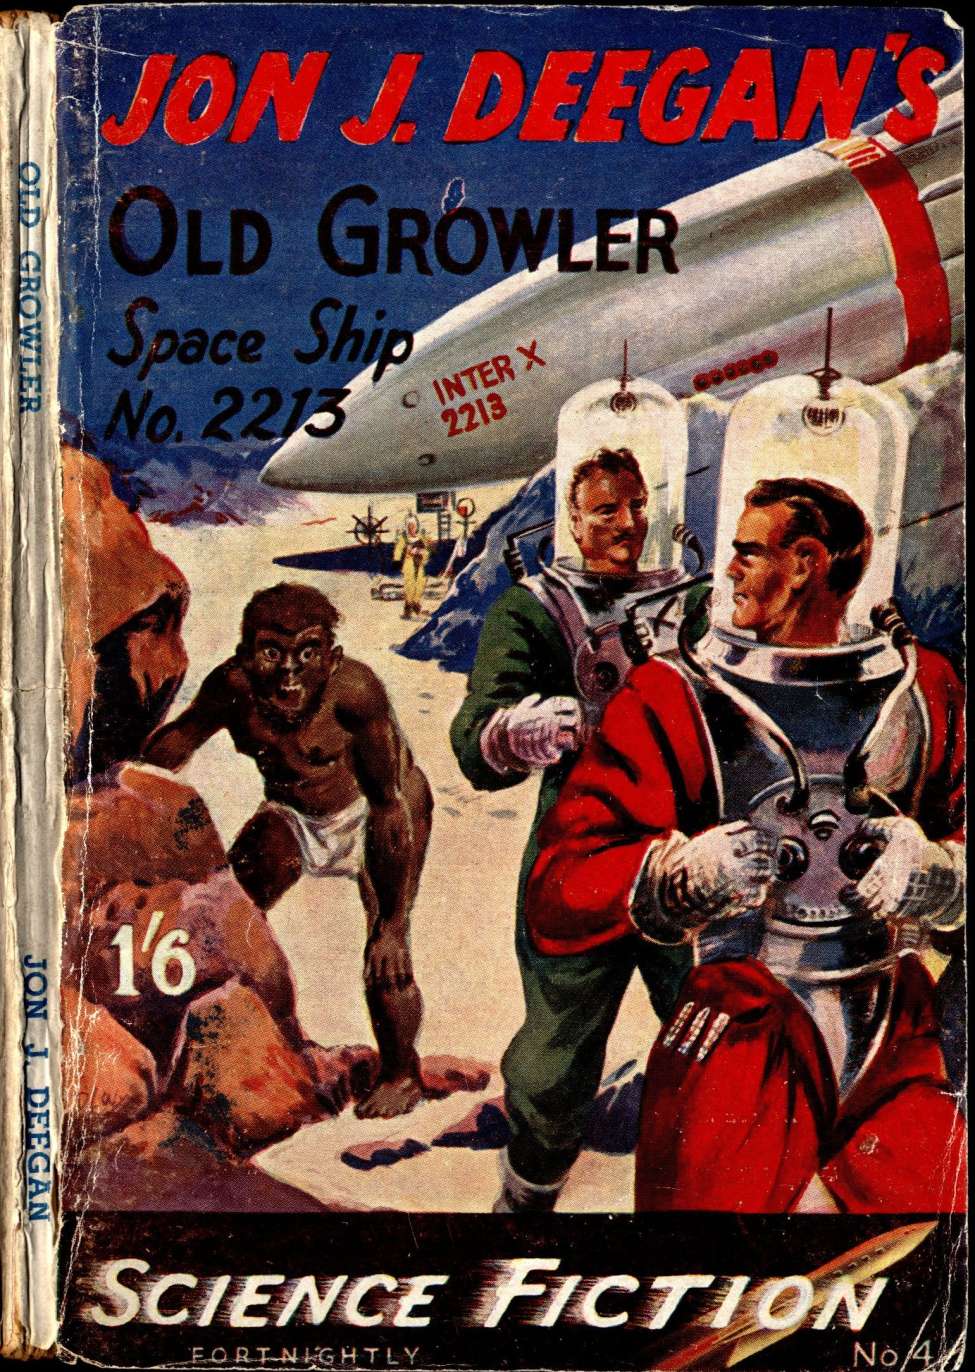 Comic Book Cover For Authentic Science Fiction 4 - Old Growler - Space Ship No. 2213 - Jon J. Deegan